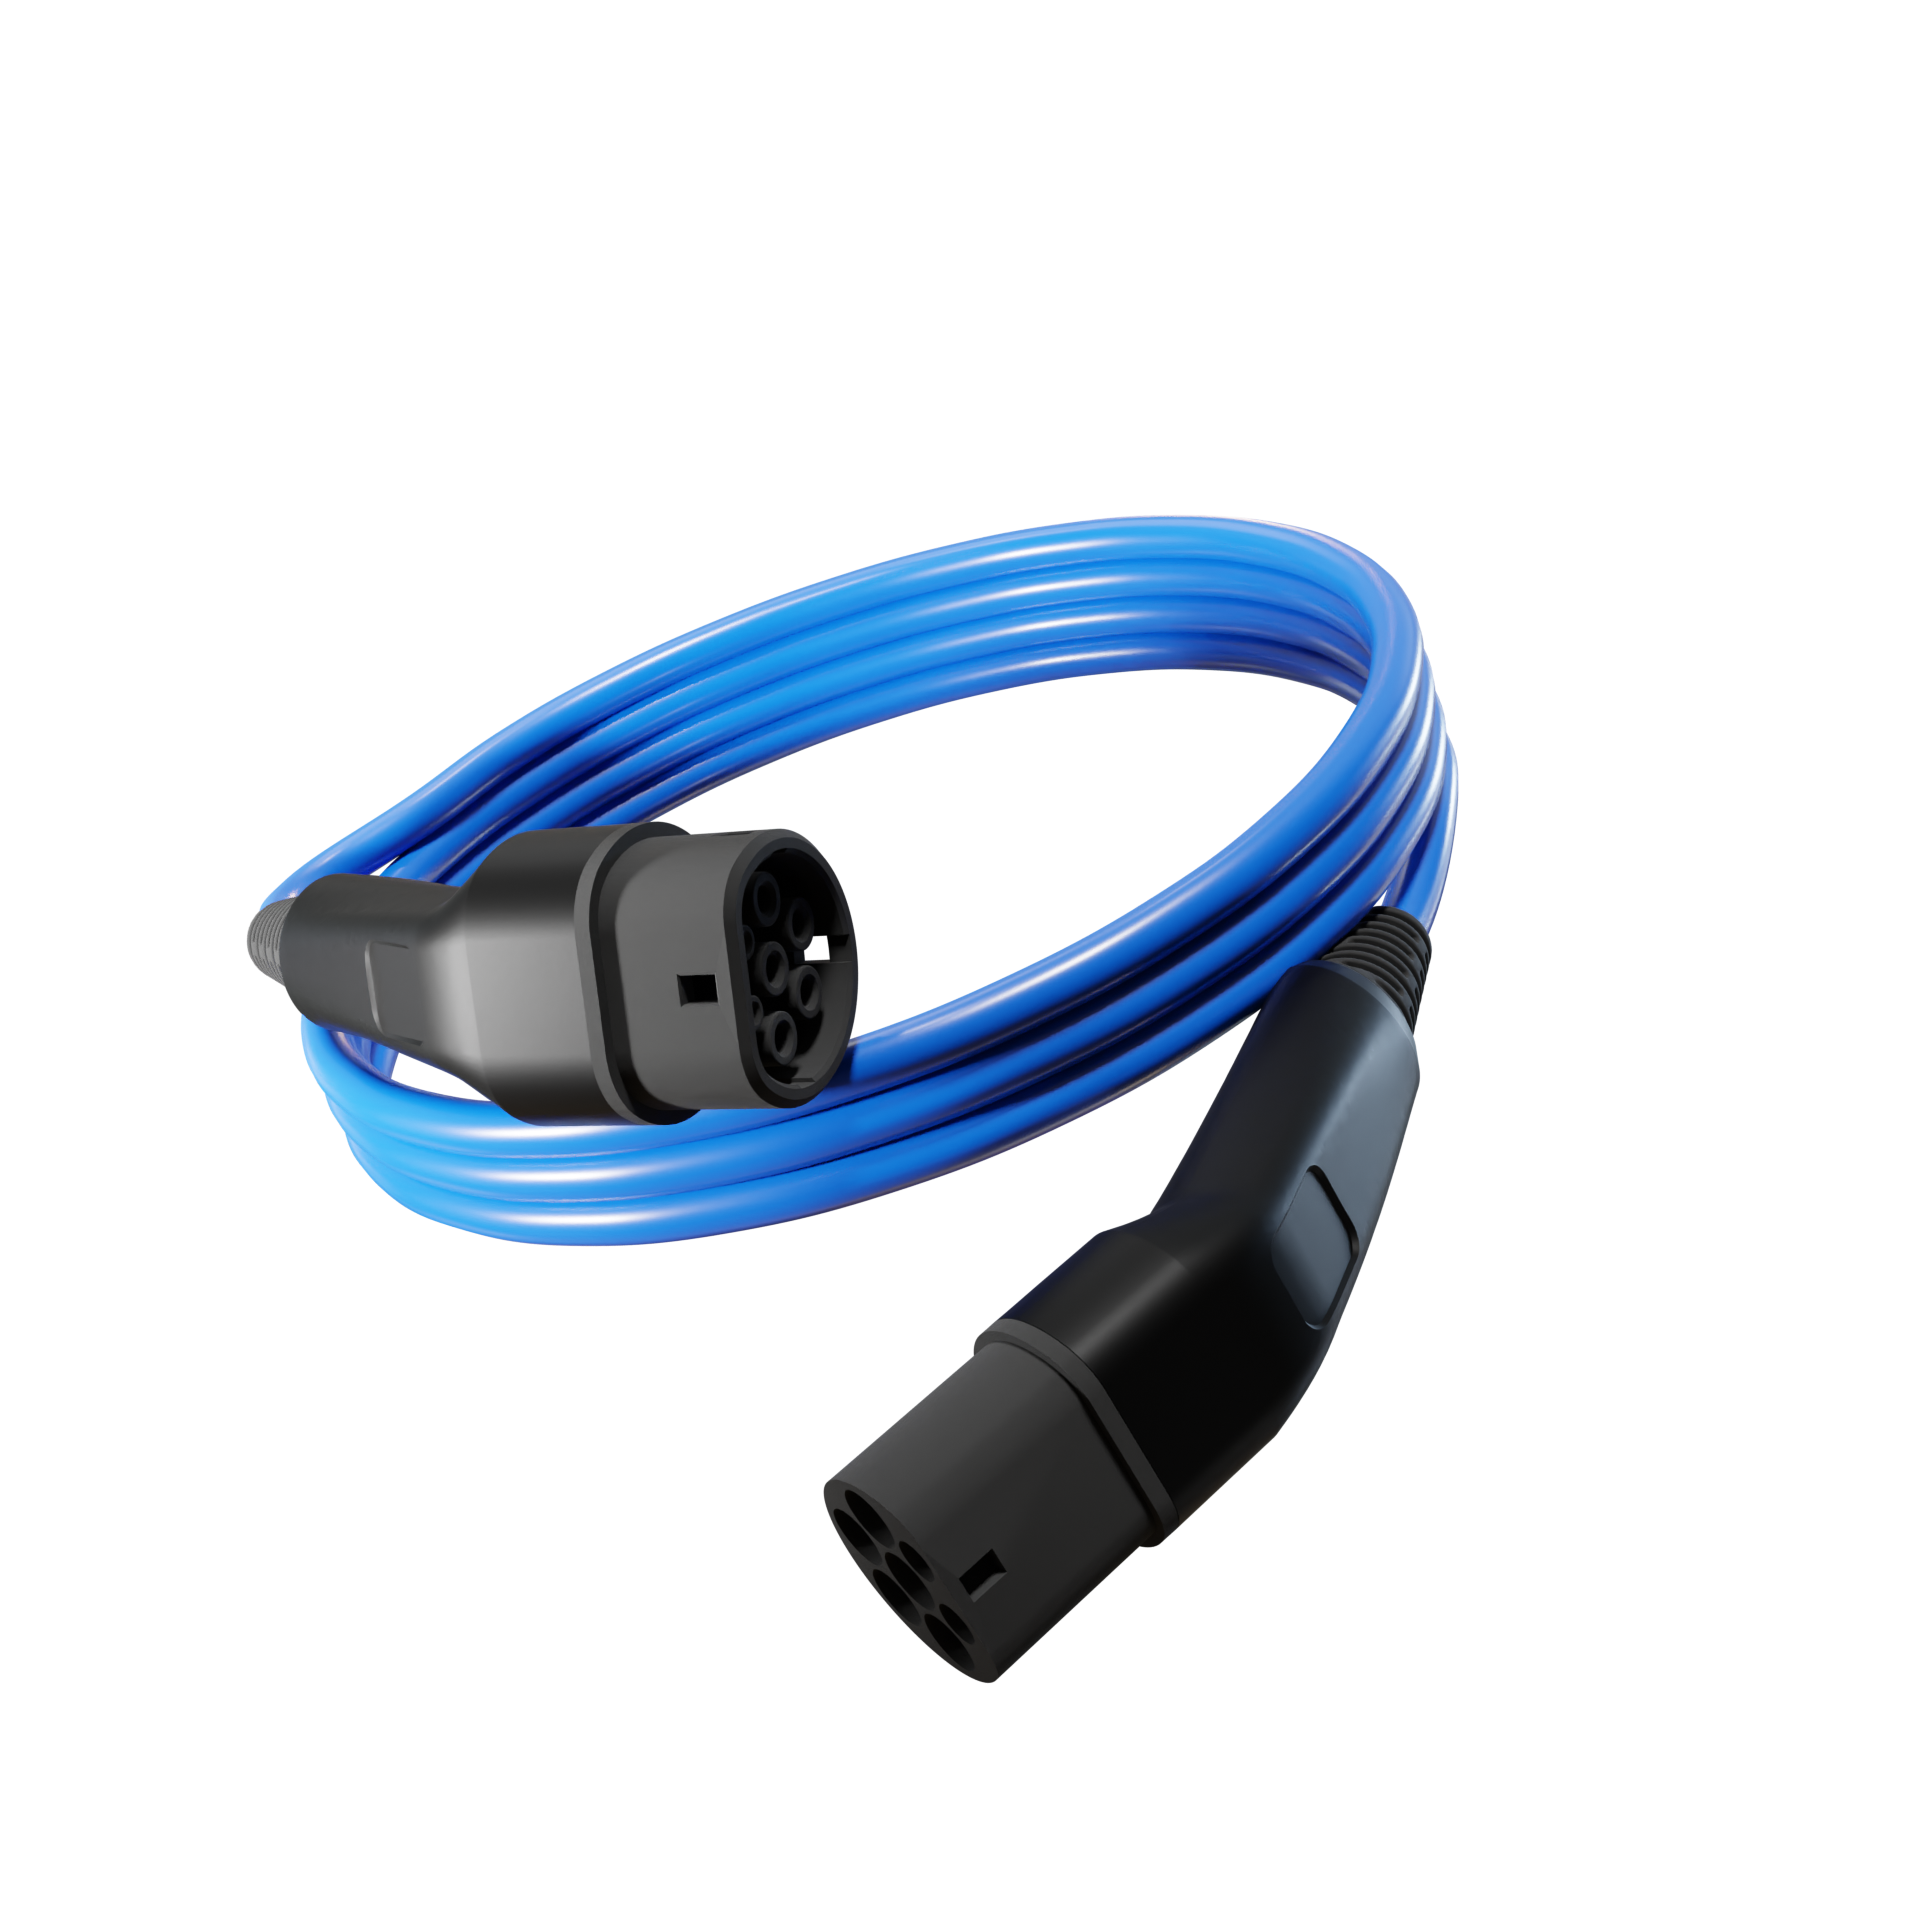 Mode 3 Tethered EV Charging Cable Type 2 IEC 62196-2 Female Three